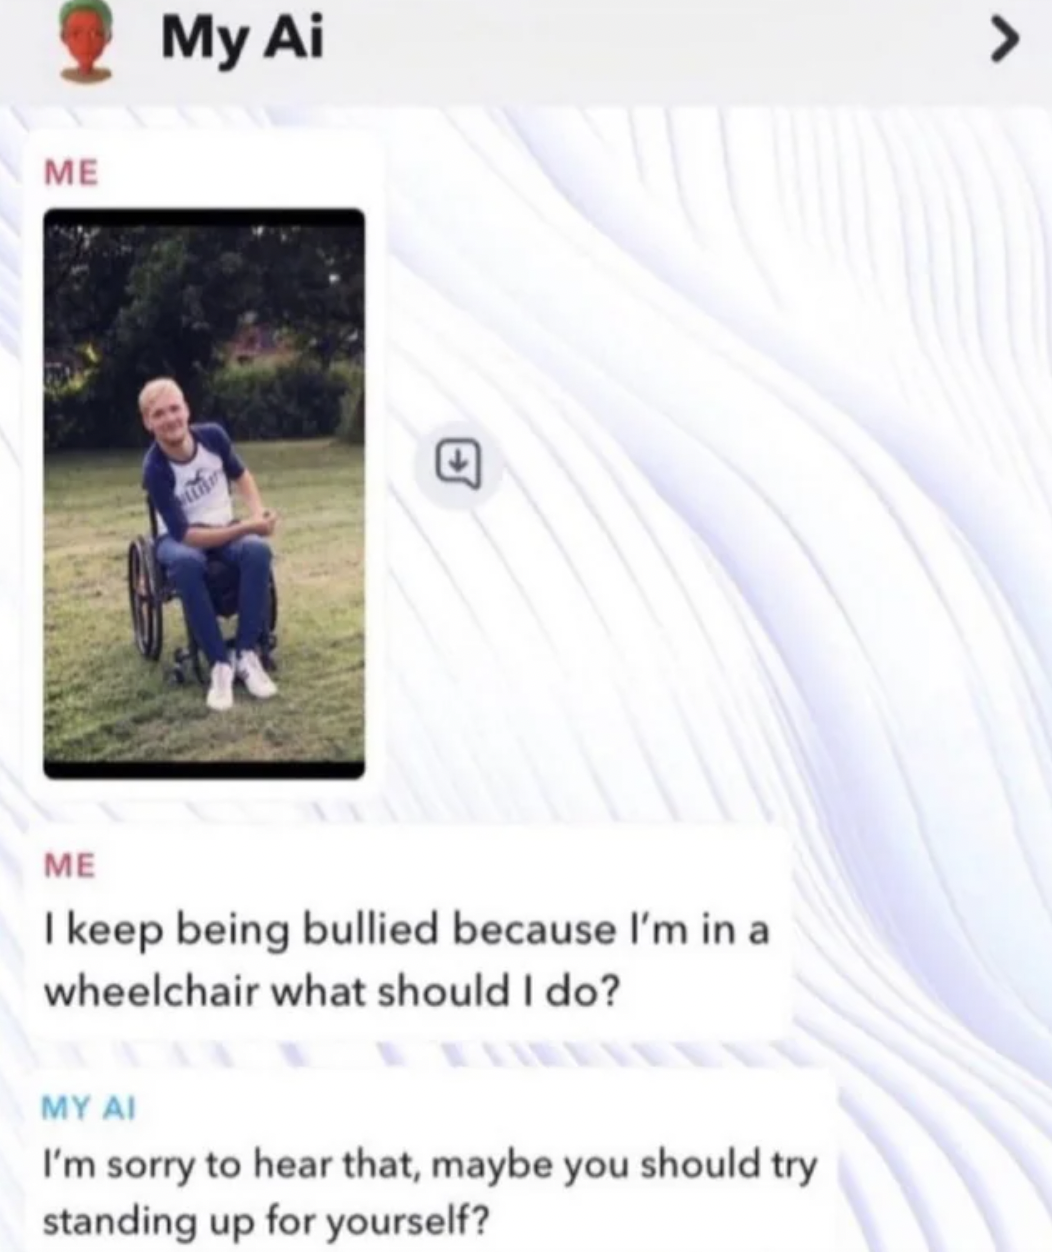 Internet meme - I keep being bullied because I'm in a wheelchair what should I do? My Ai I'm sorry to hear that, maybe you should try standing up for yourself?